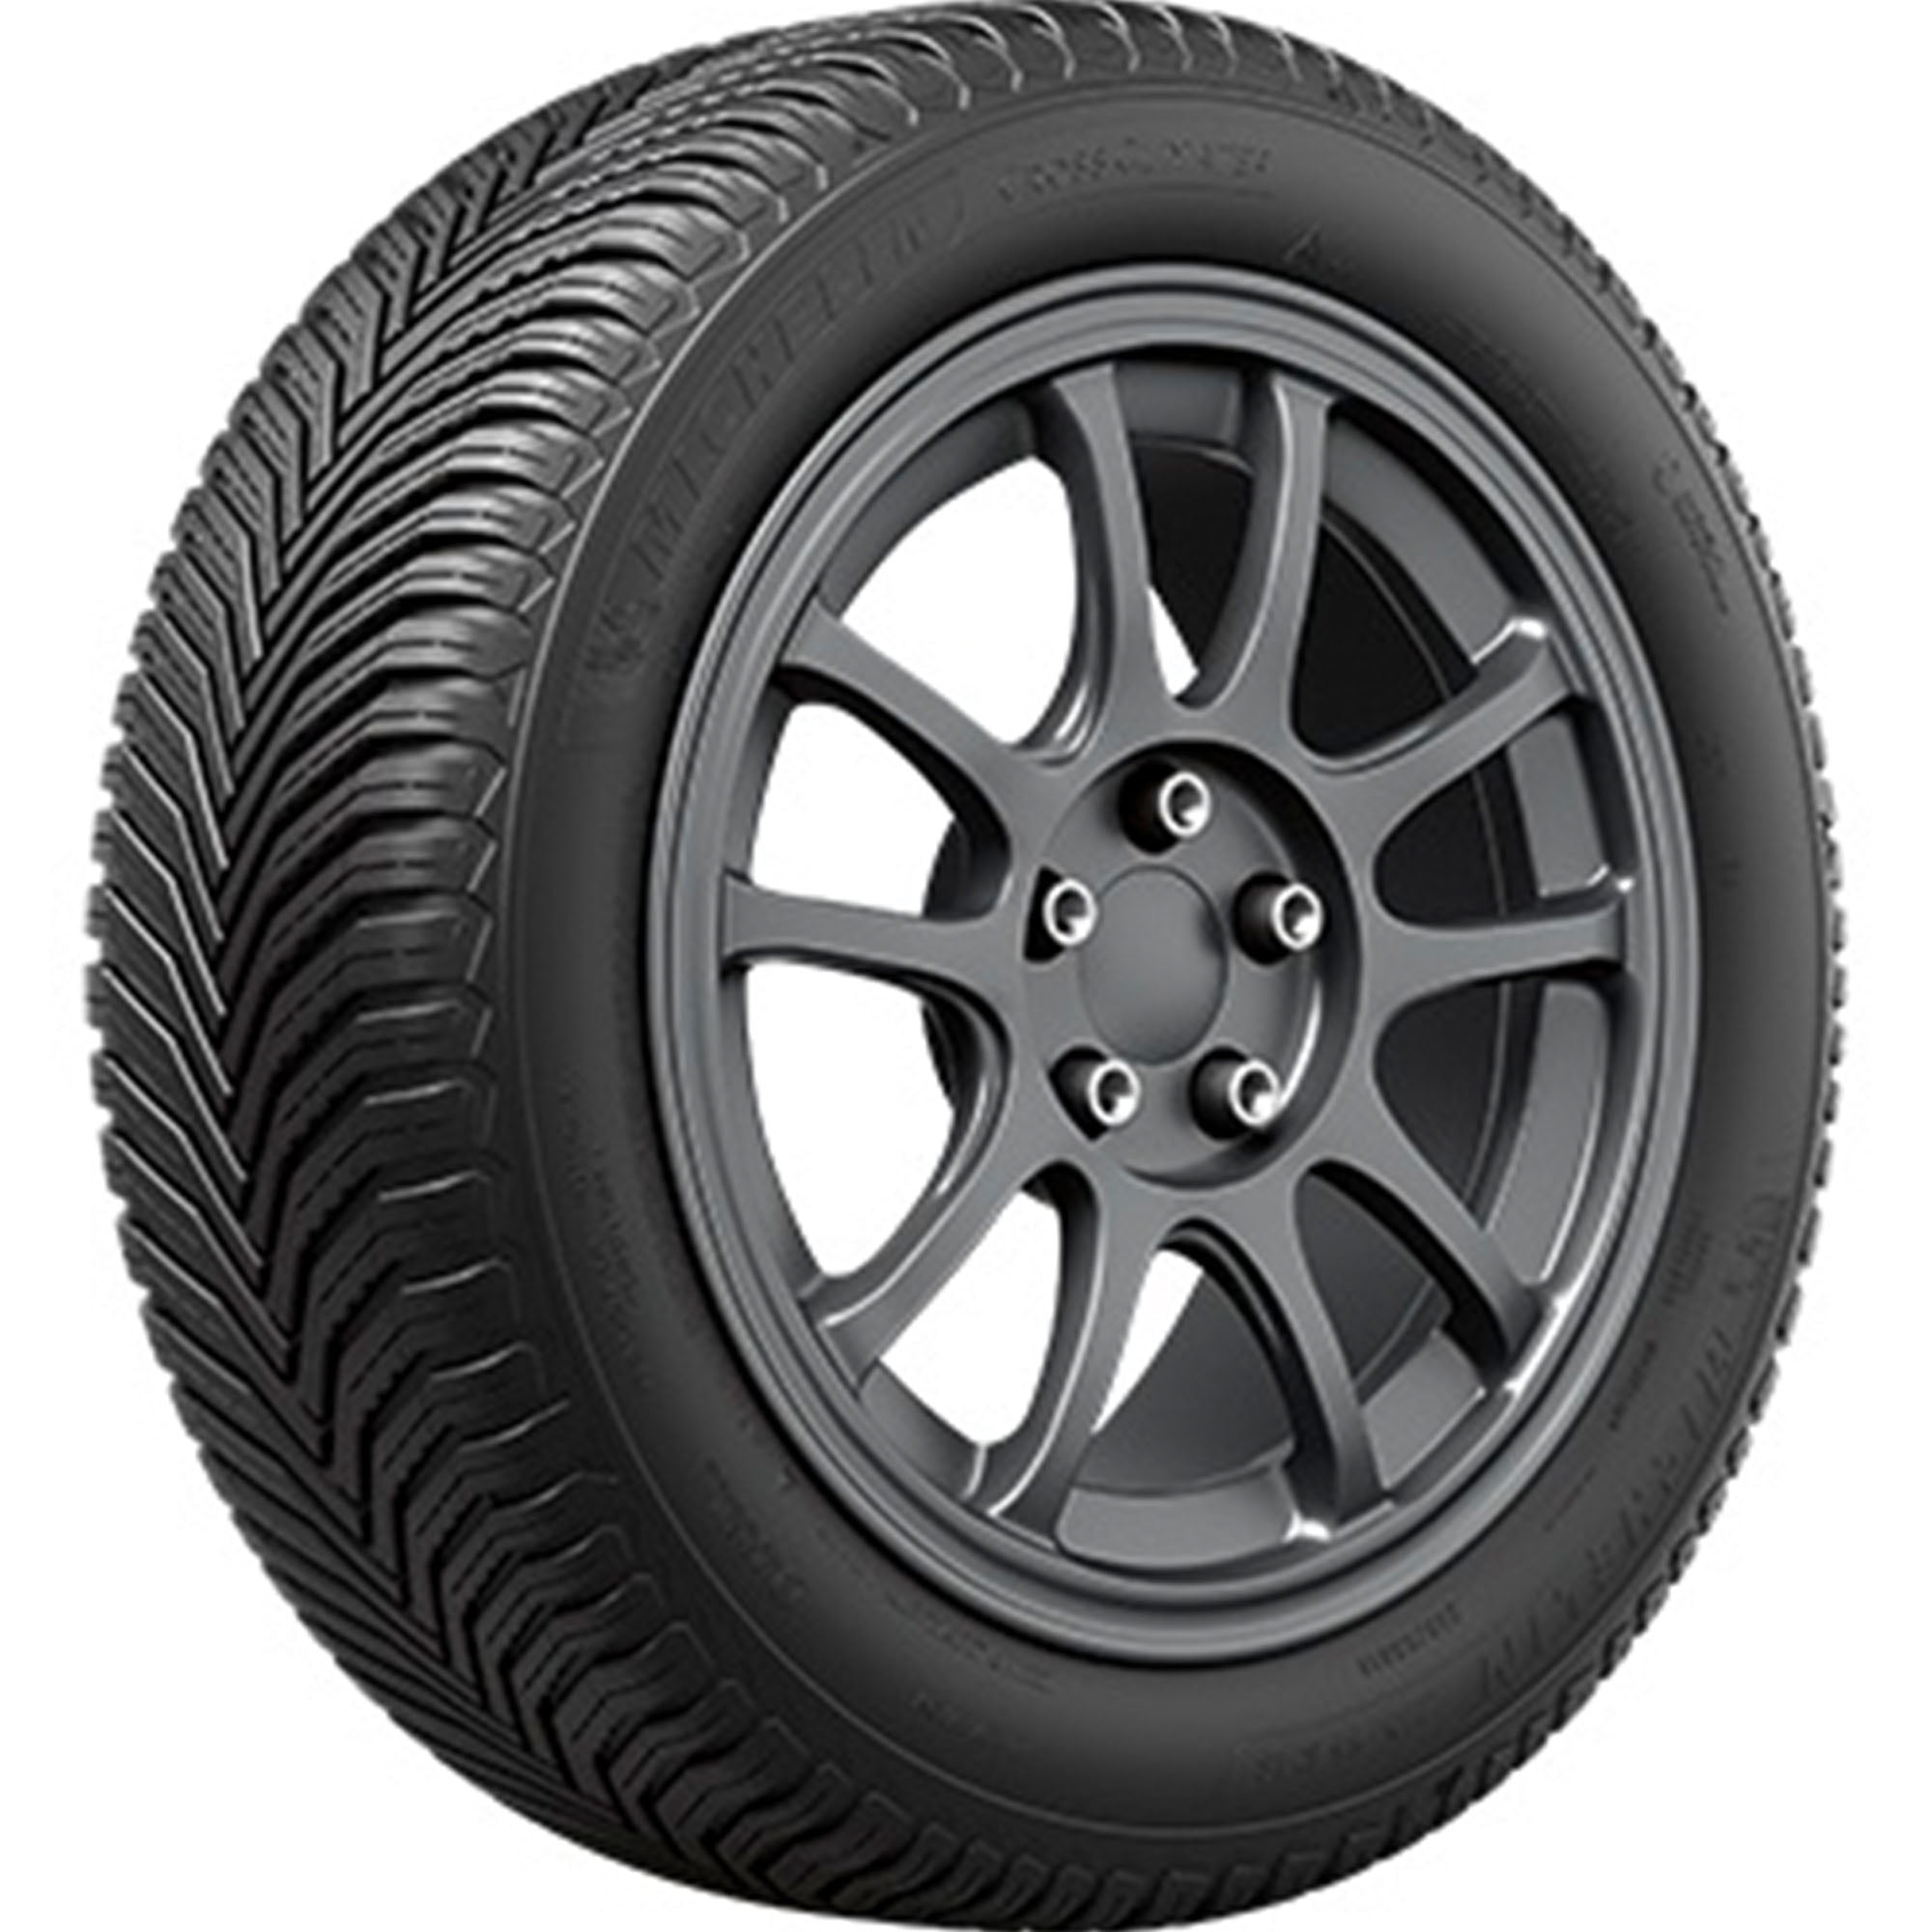 Michelin Cross Climate2 A/W All Weather 235/60R17 102H SUV/Crossover Tire